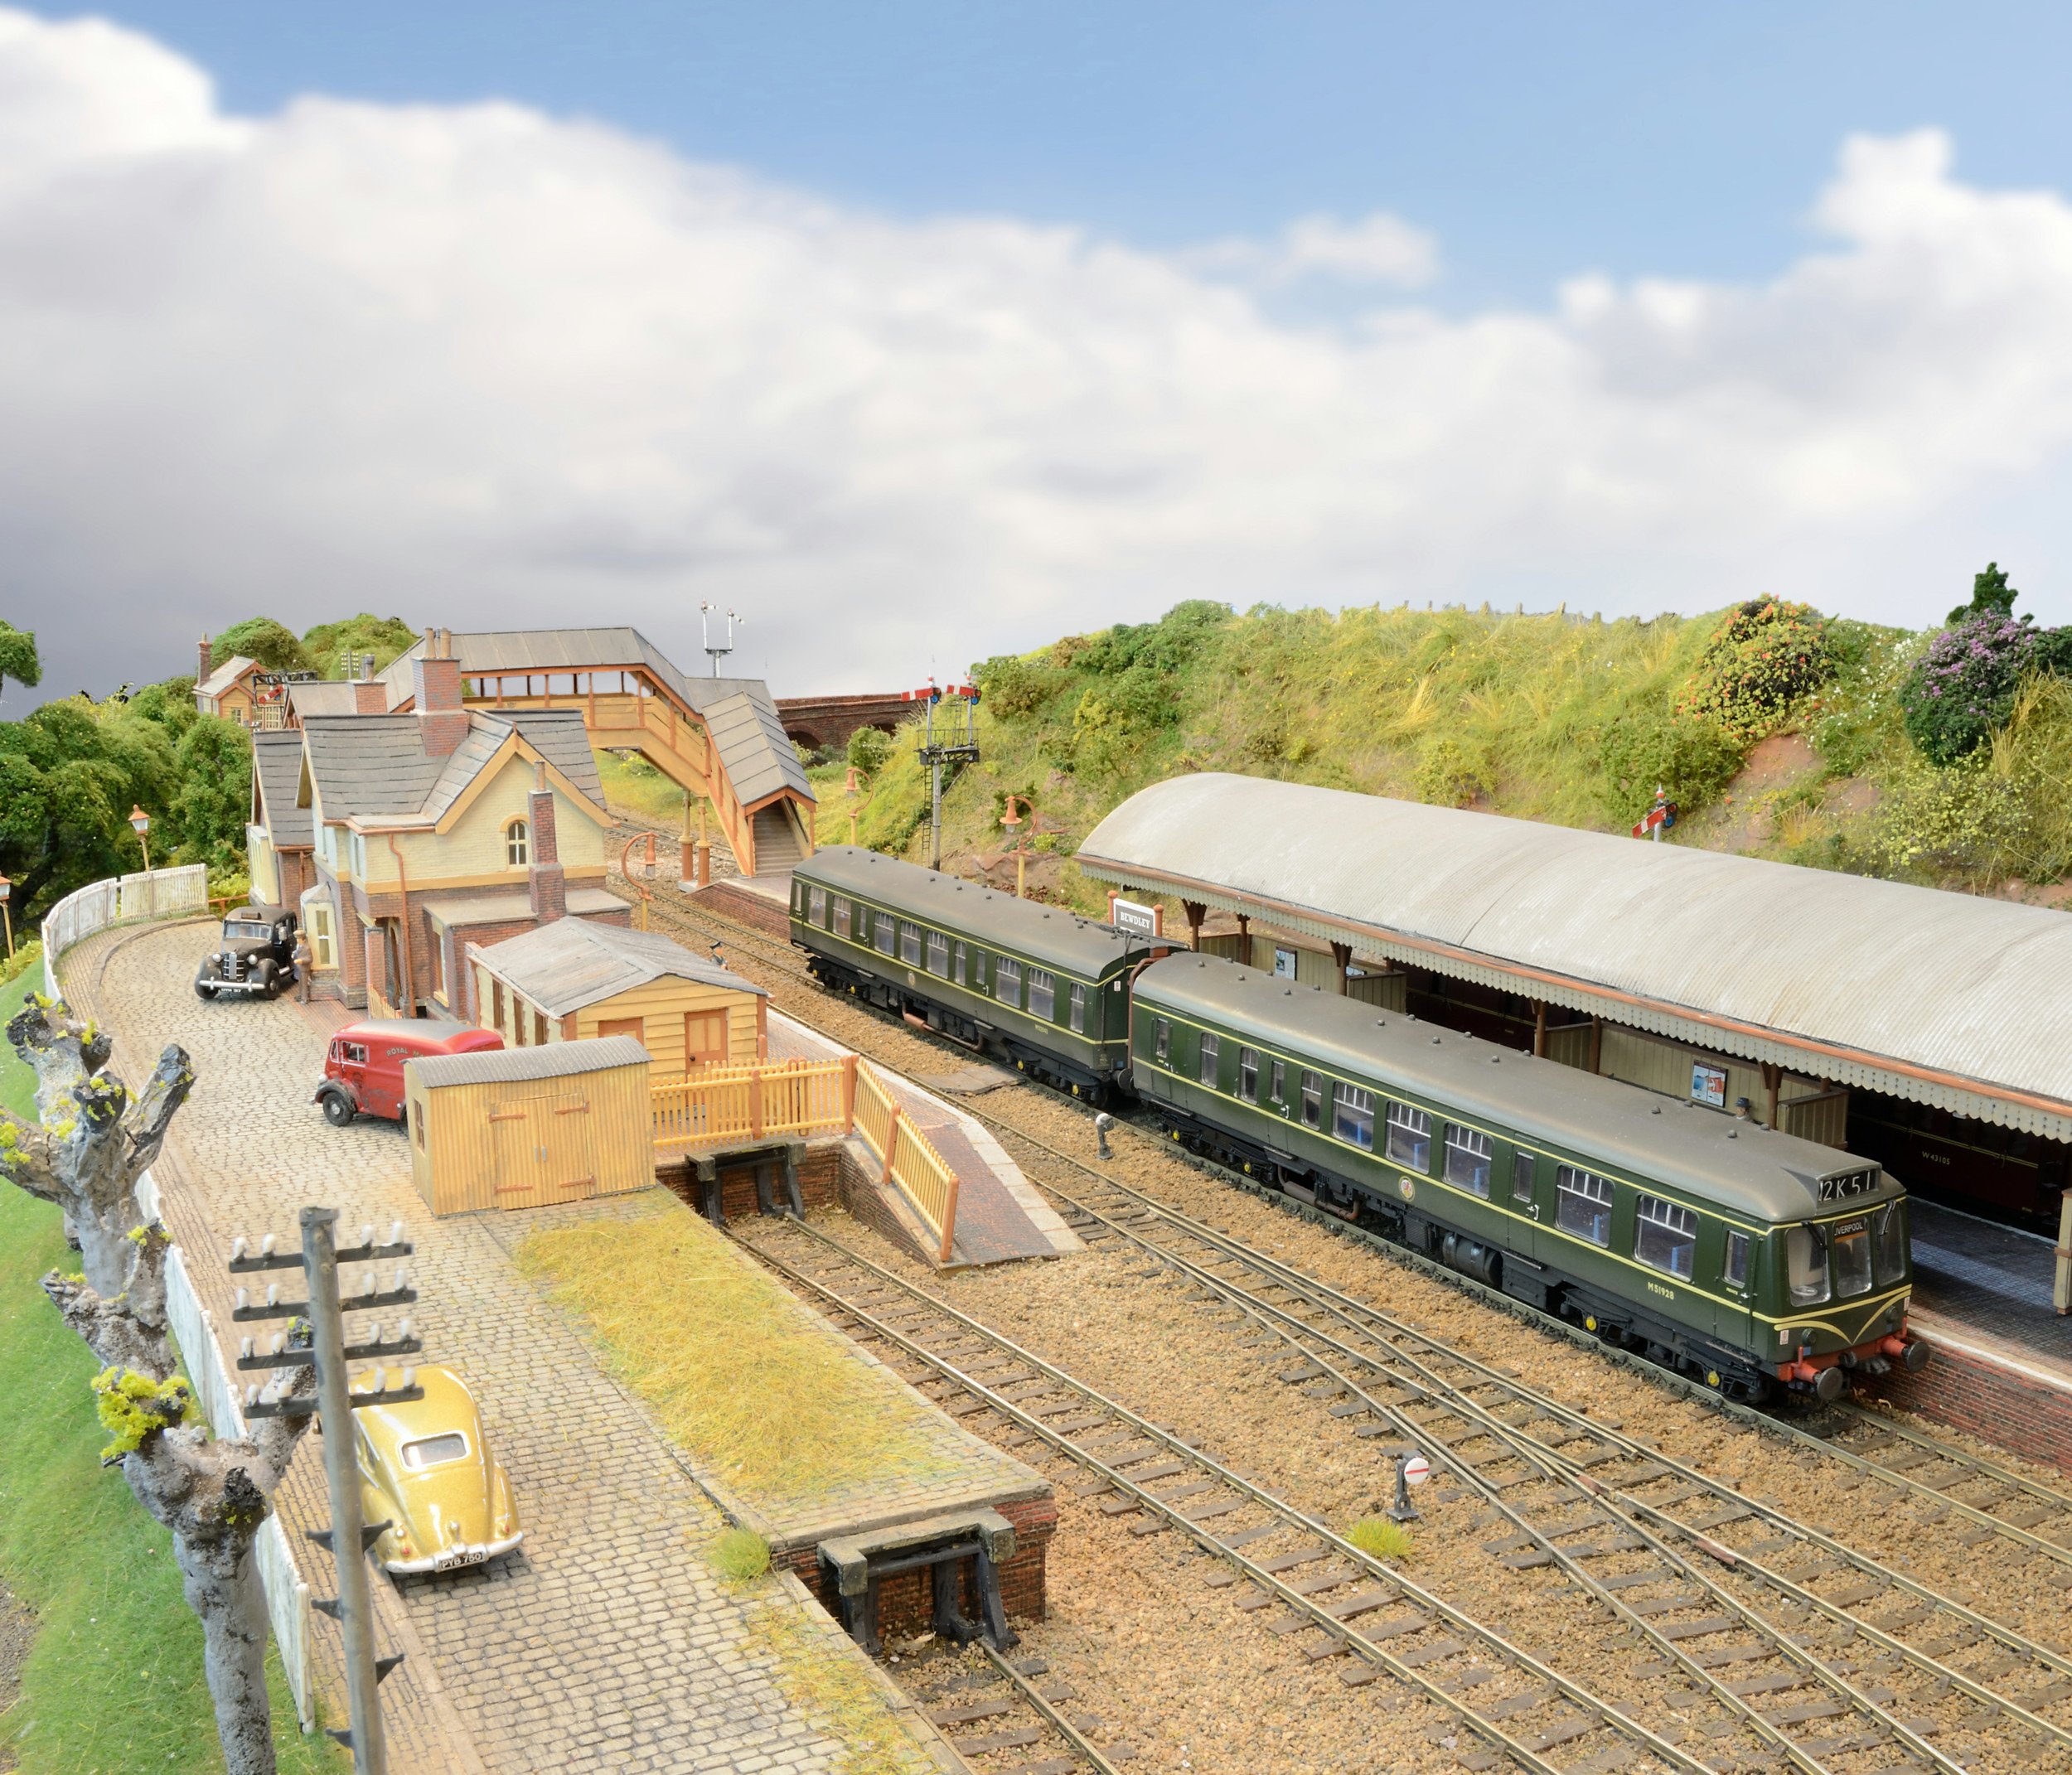 Graham Heald and Chris Manners’ ‘OO’ gauge model of Bewdley reflects the well-known Severn Valley line station in the 1960s.